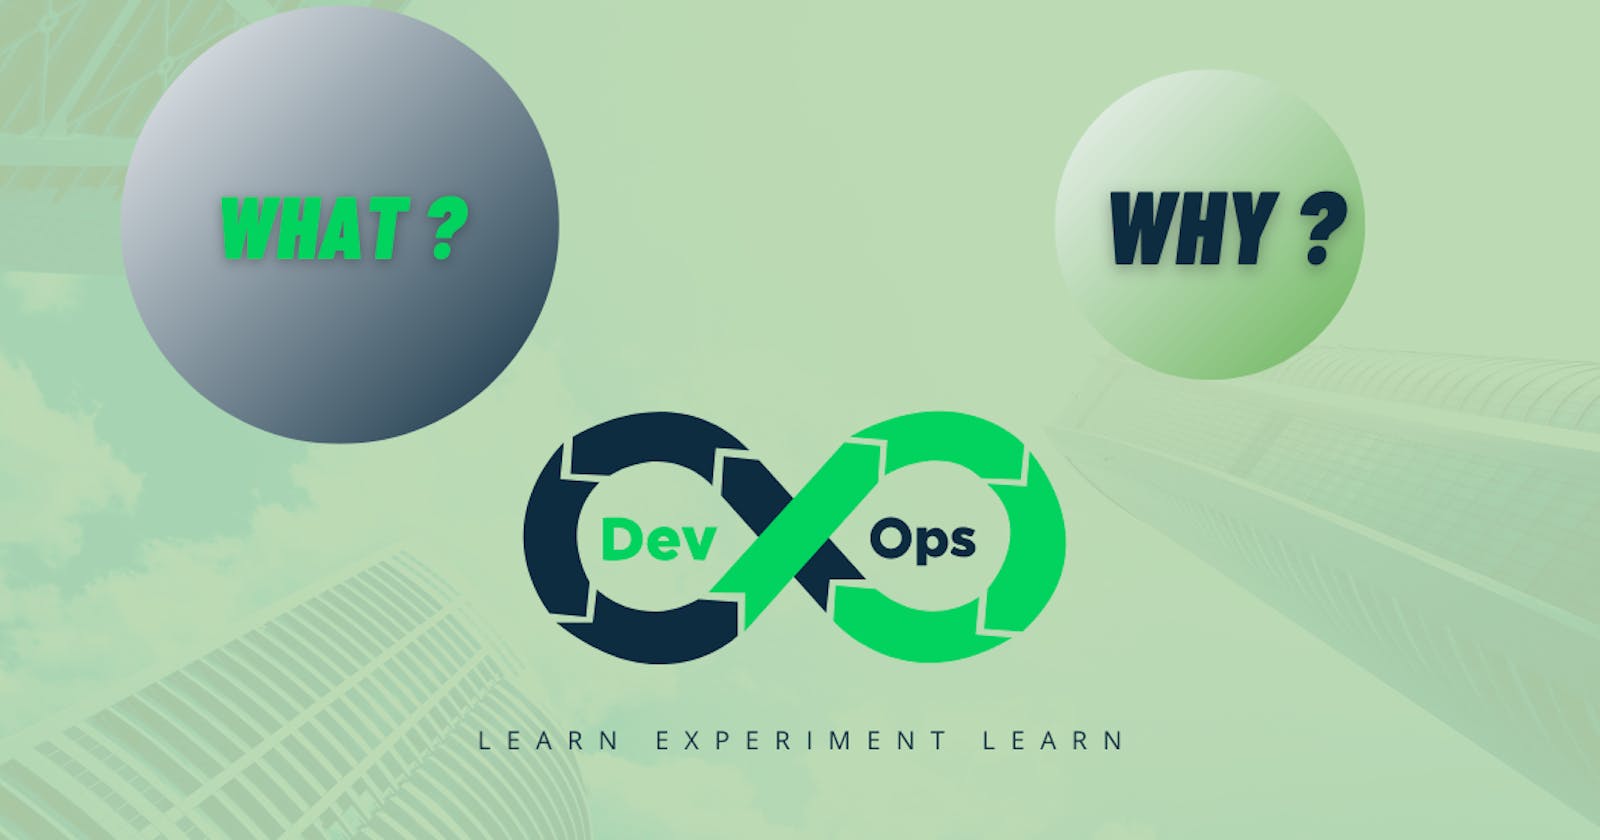 What is DevOps and why ?